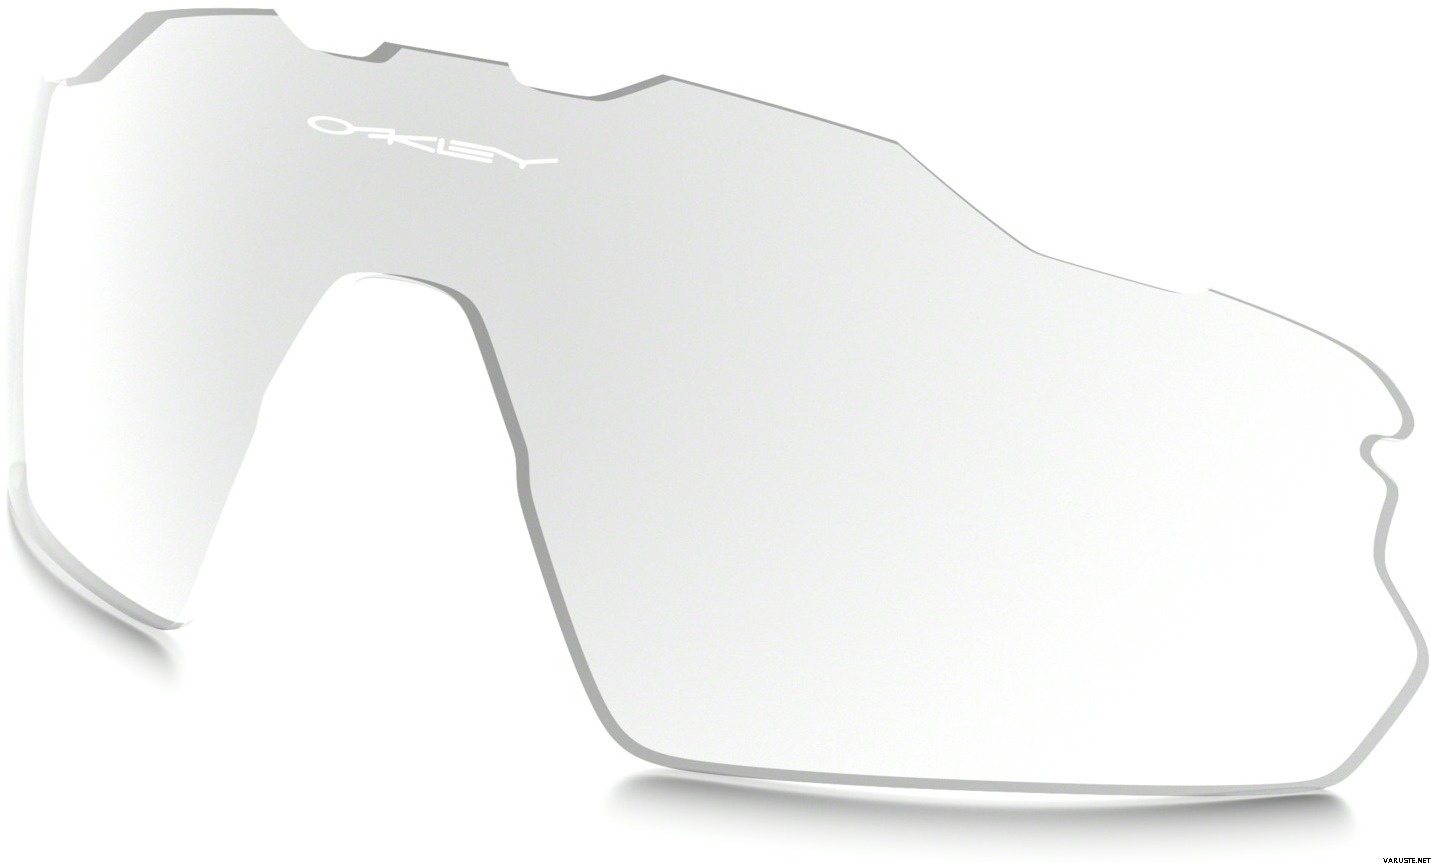 oakley radar pitch replacement lenses